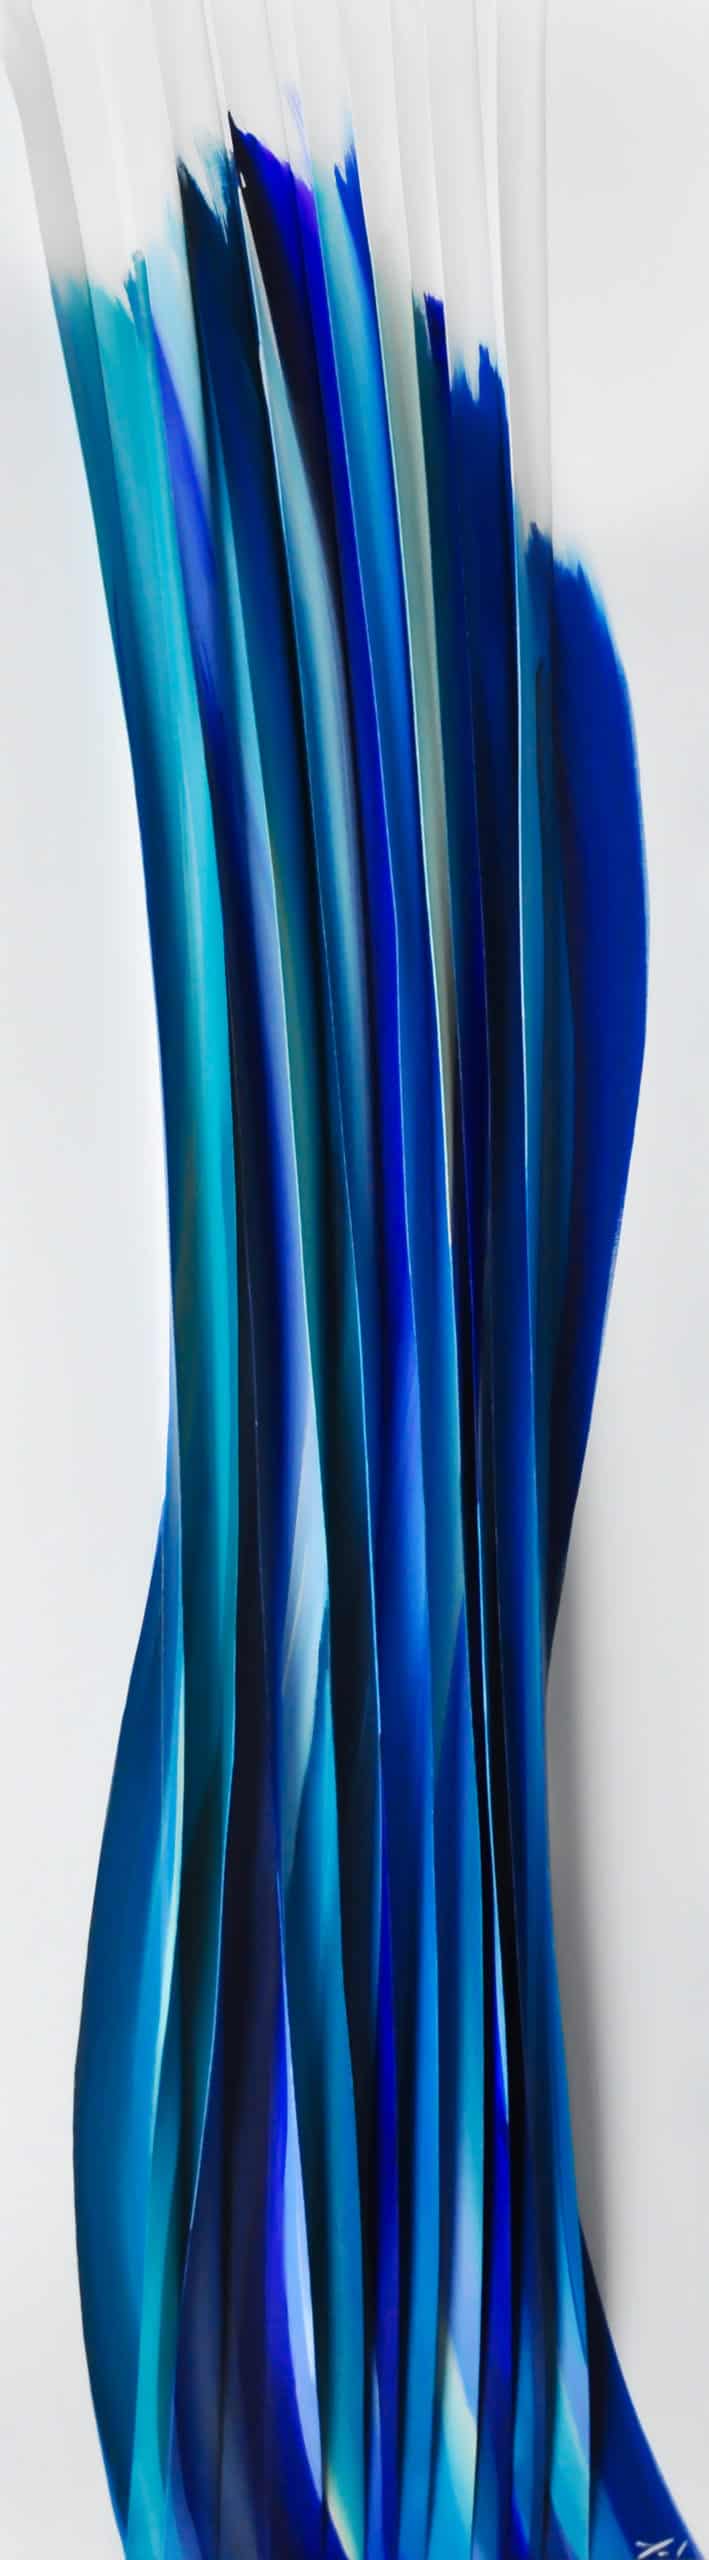 Buy a painting of blue outlines called Rêve Atlantique.